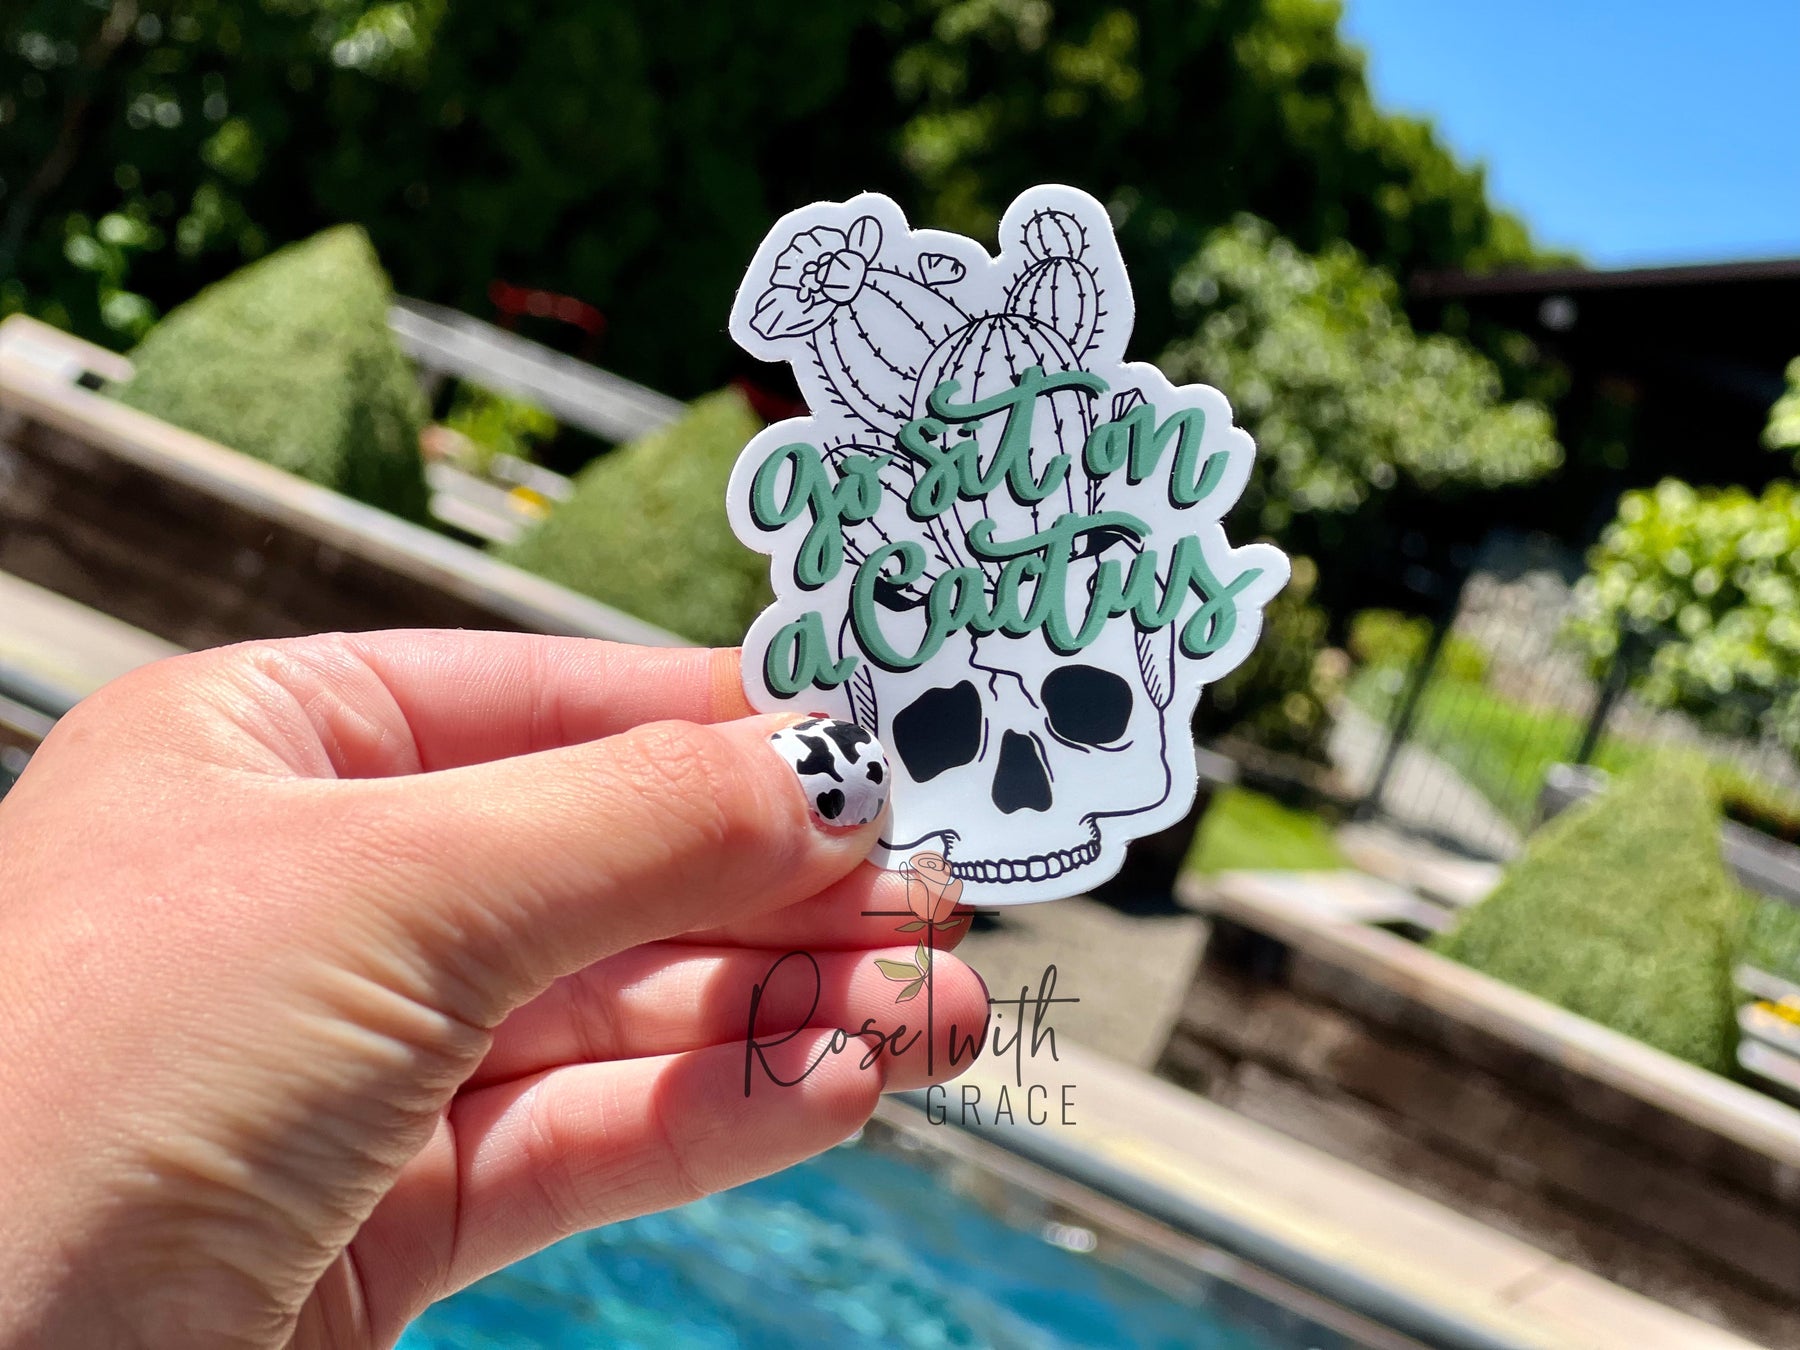 GO SIT ON A CACTUS - STICKER Rose with Grace LLC